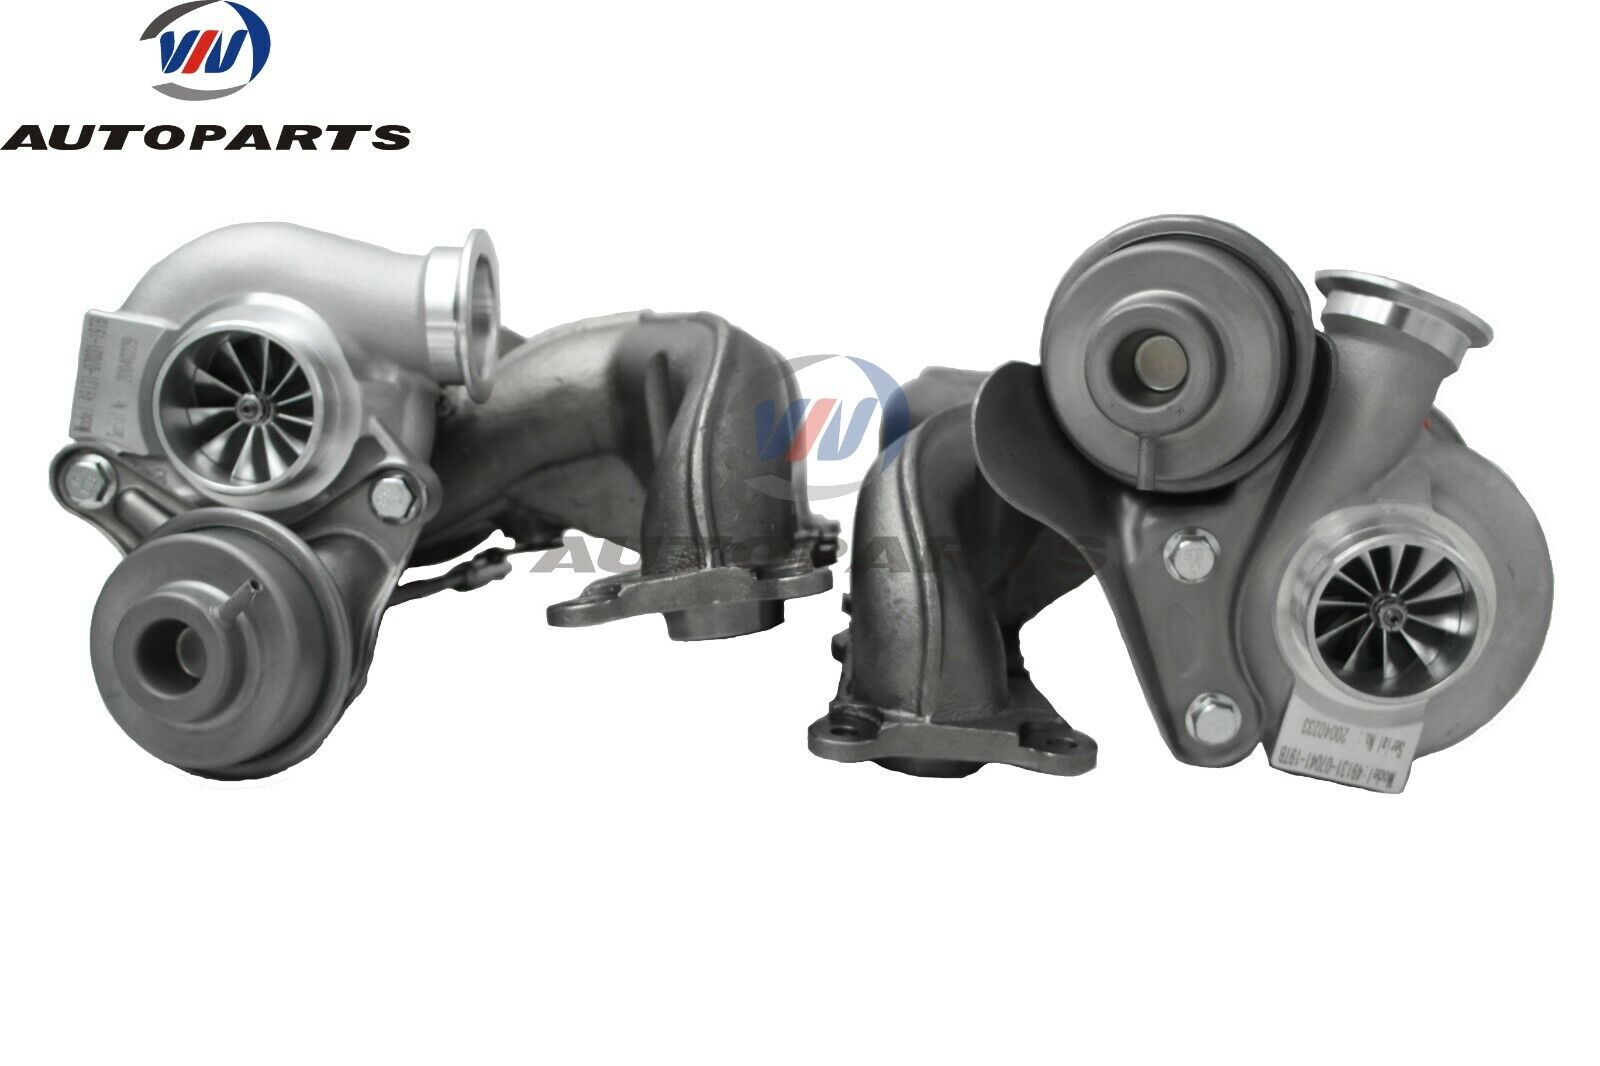 NEW Improved V3 TD04-19T Billet Twin Turbochargers for BMW 335i 3.0L with N54